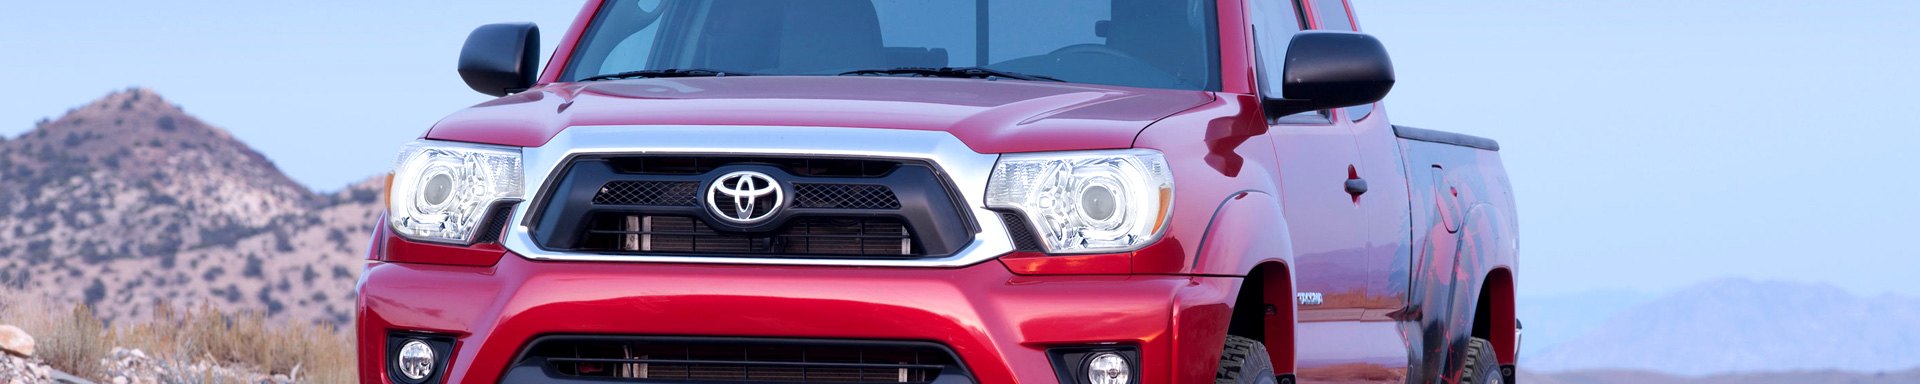 Lumen LED Projector DRL Bar Headlights Now Available for Toyota Tacoma